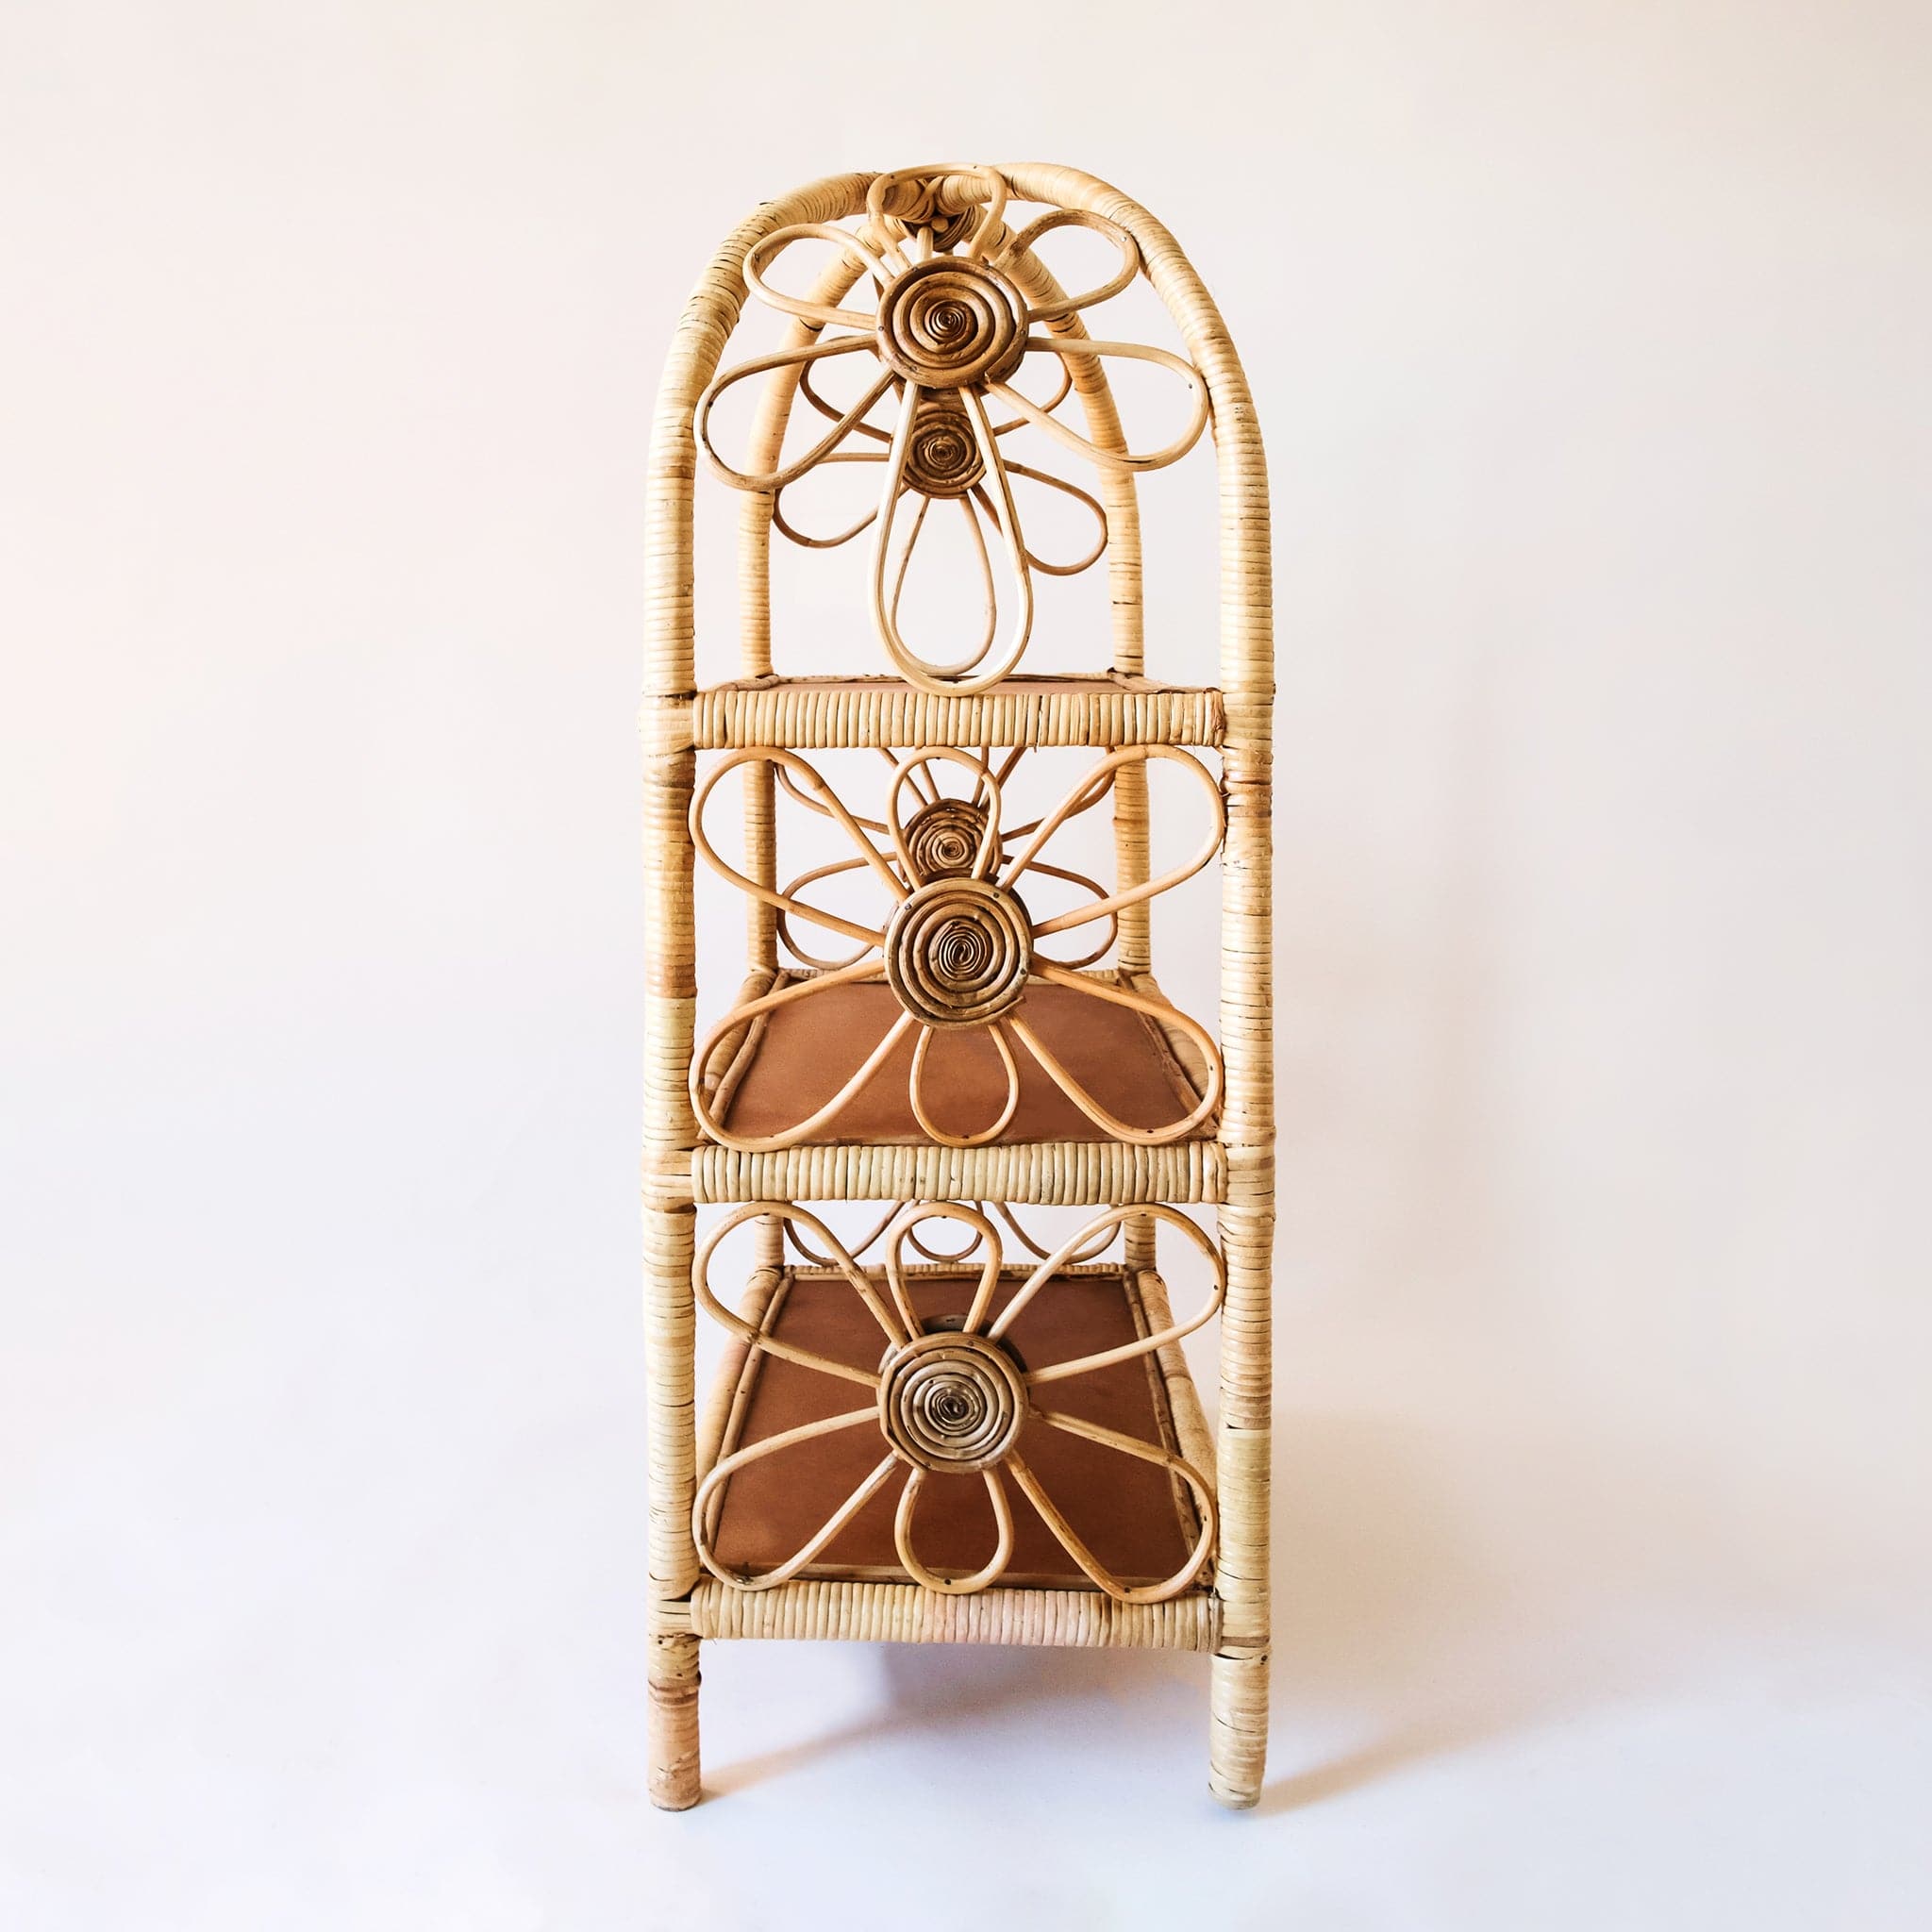 Side view of natural woven rattan shelf with daisy accents on both sides. The sides are open and let in ample light to keep the shelves well lit. Each shelf is covered in rattan and has a chocolate brown bottom.